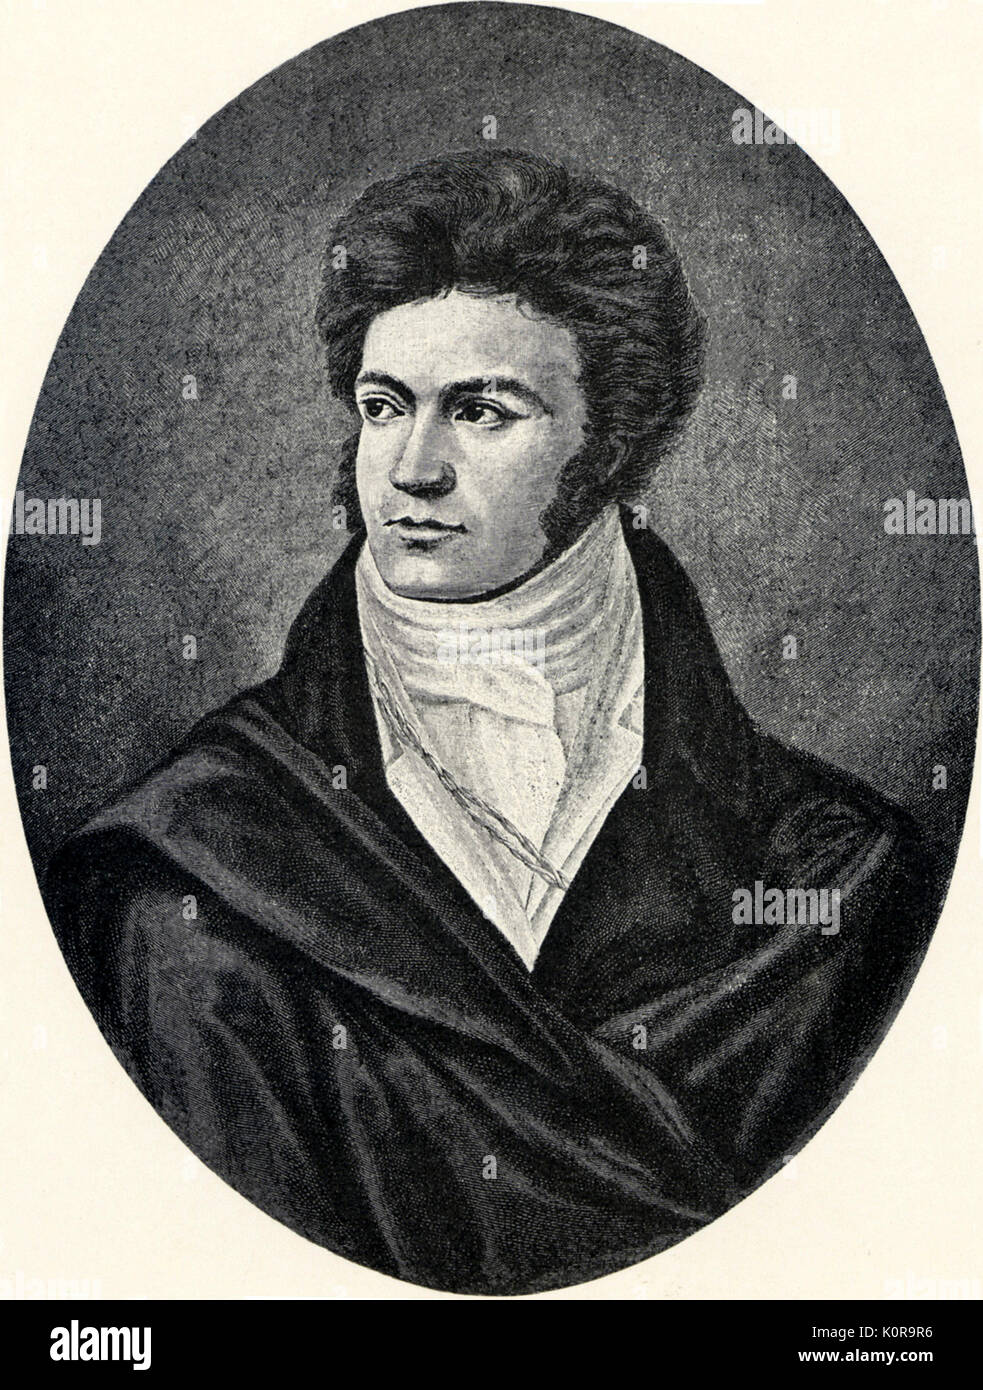 BEETHOVEN, Ludwig van - as a young man German composer 1770-1827 Stock Photo